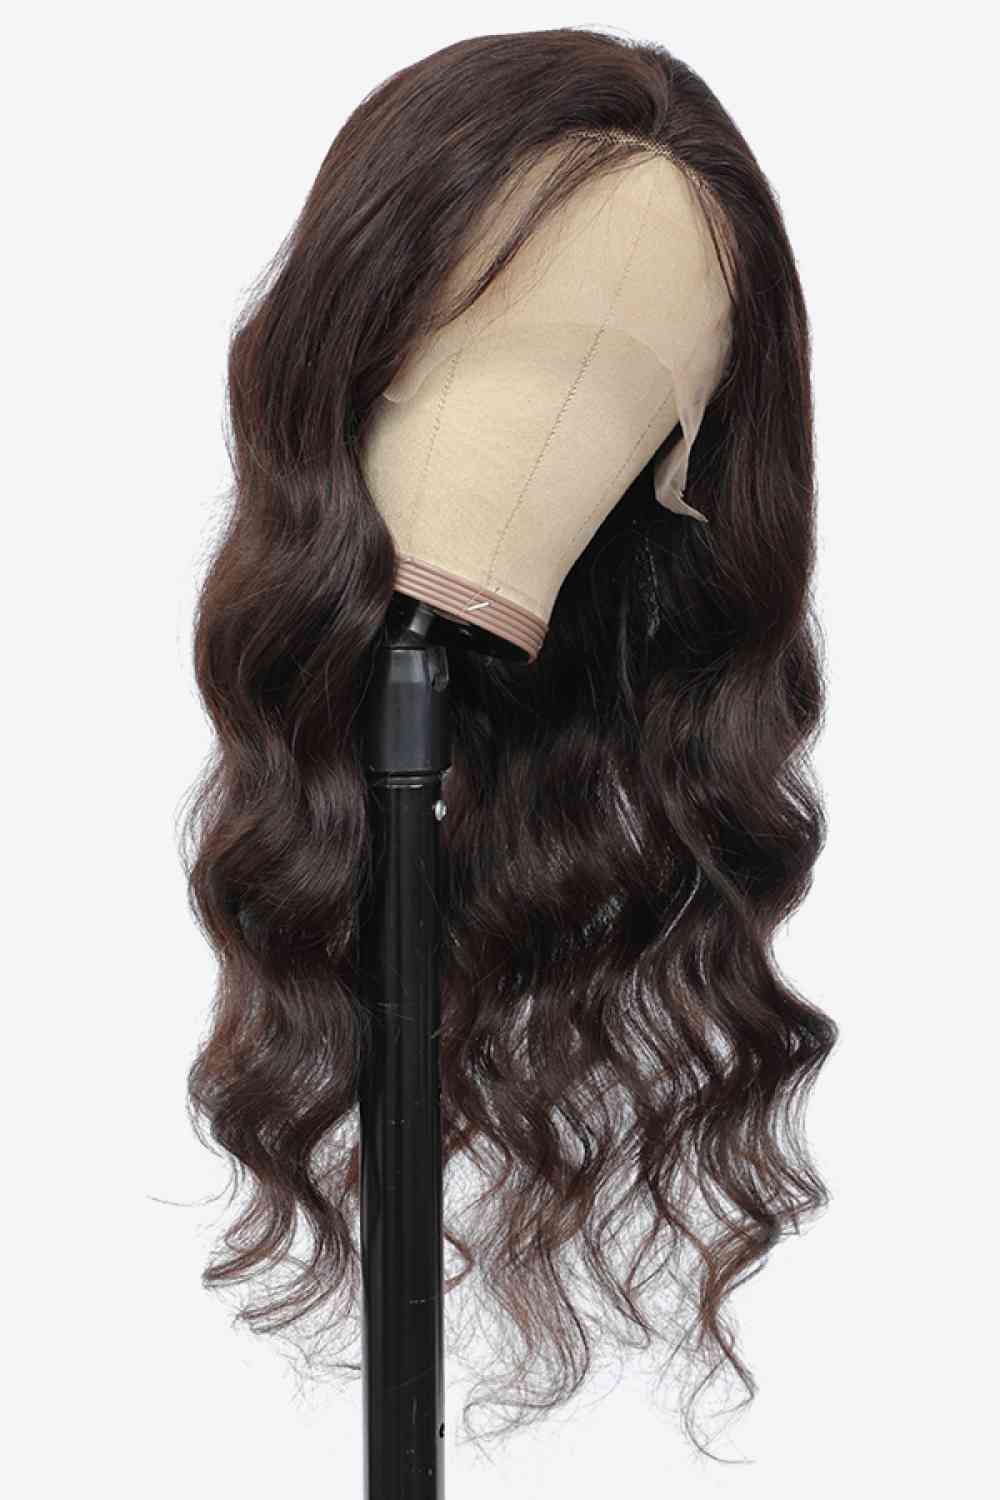 Brazilian Remy 20" 13x4 Lace Front Wigs Body Wave Human Virgin Hair Natural Color 150% Density